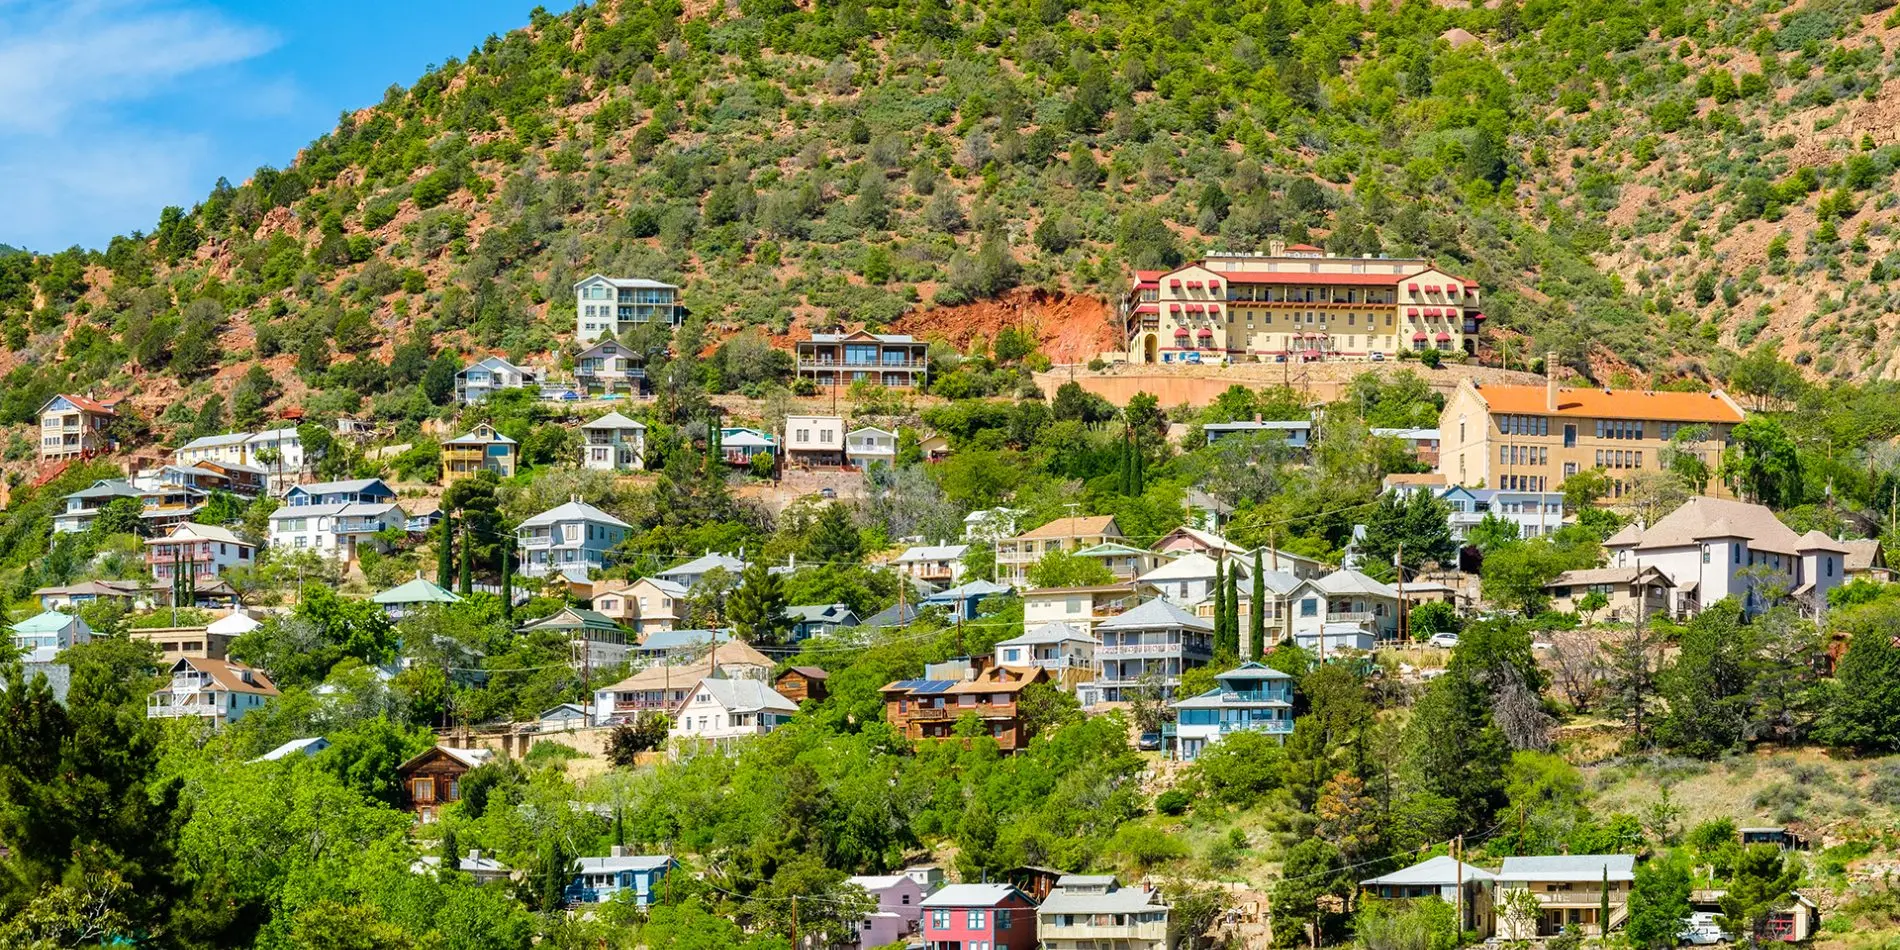 Jerome town